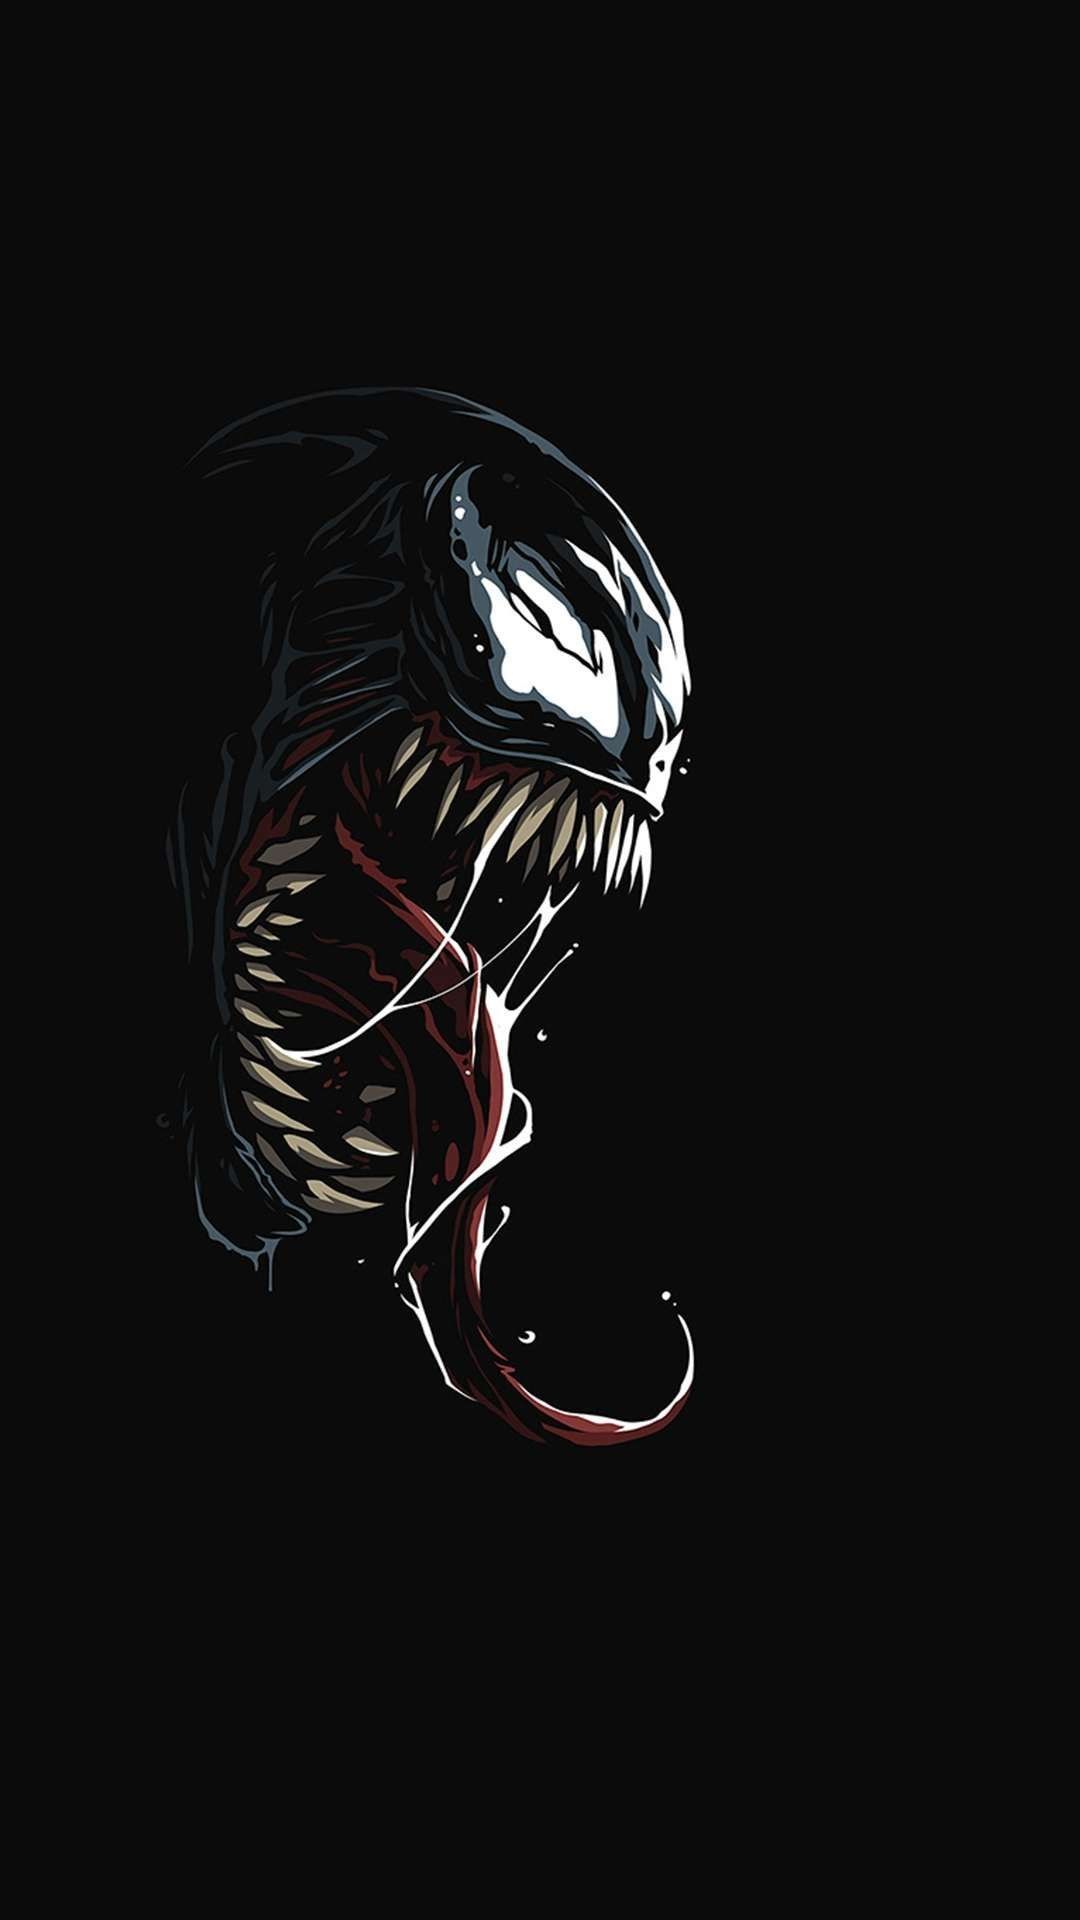 Venom Abstract Android iPhone Desktop HD Background